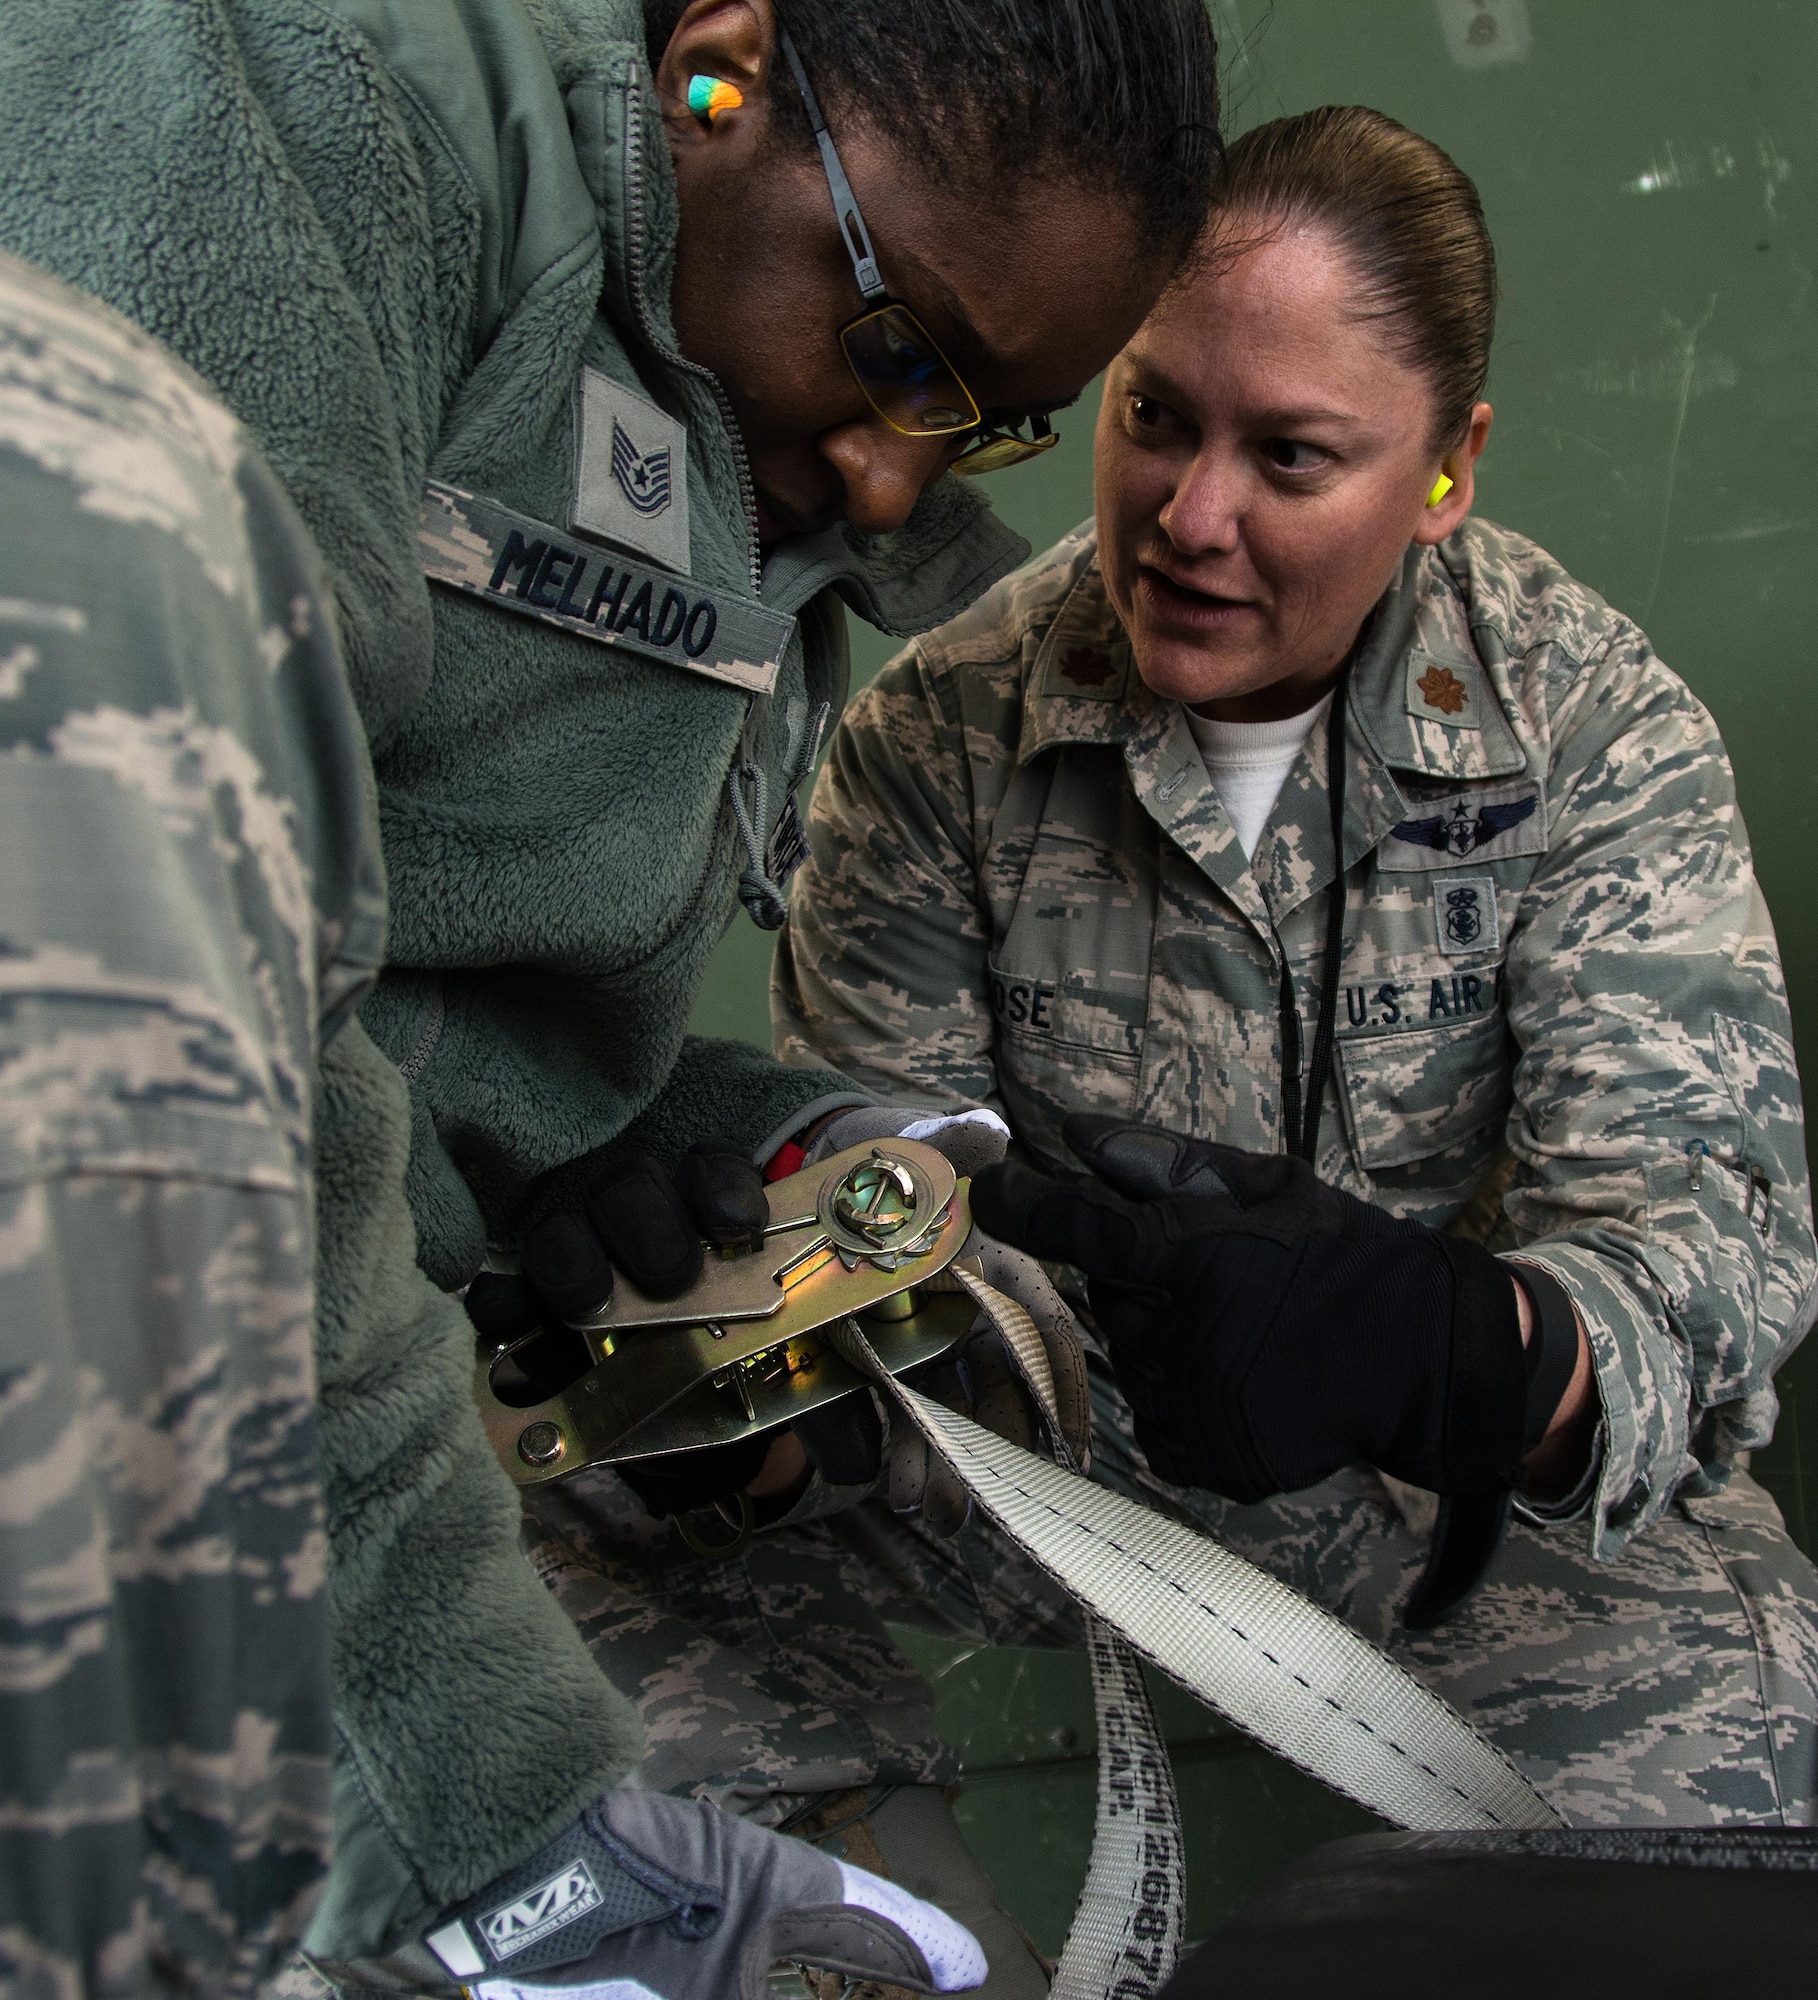 Maj. Kelly Rose, 349th Aeromedical Evacuation Squadron operations flight commander, instructs Tech. Sgt. Anna Melhado, 60th Inpatient Squadron medical technician, on how to properly secure a litter onto an aircraft during Patriot Delta at Travis Air Force Base, Calif. on March 24, 2017.  Members of the 60th IPTS participated in the Air Force Reserve exercise Patriot Delta, providing enroute patient care and staging the medical manikins. (U.S. Air Force photo by Staff Sgt. Daniel Phelps)